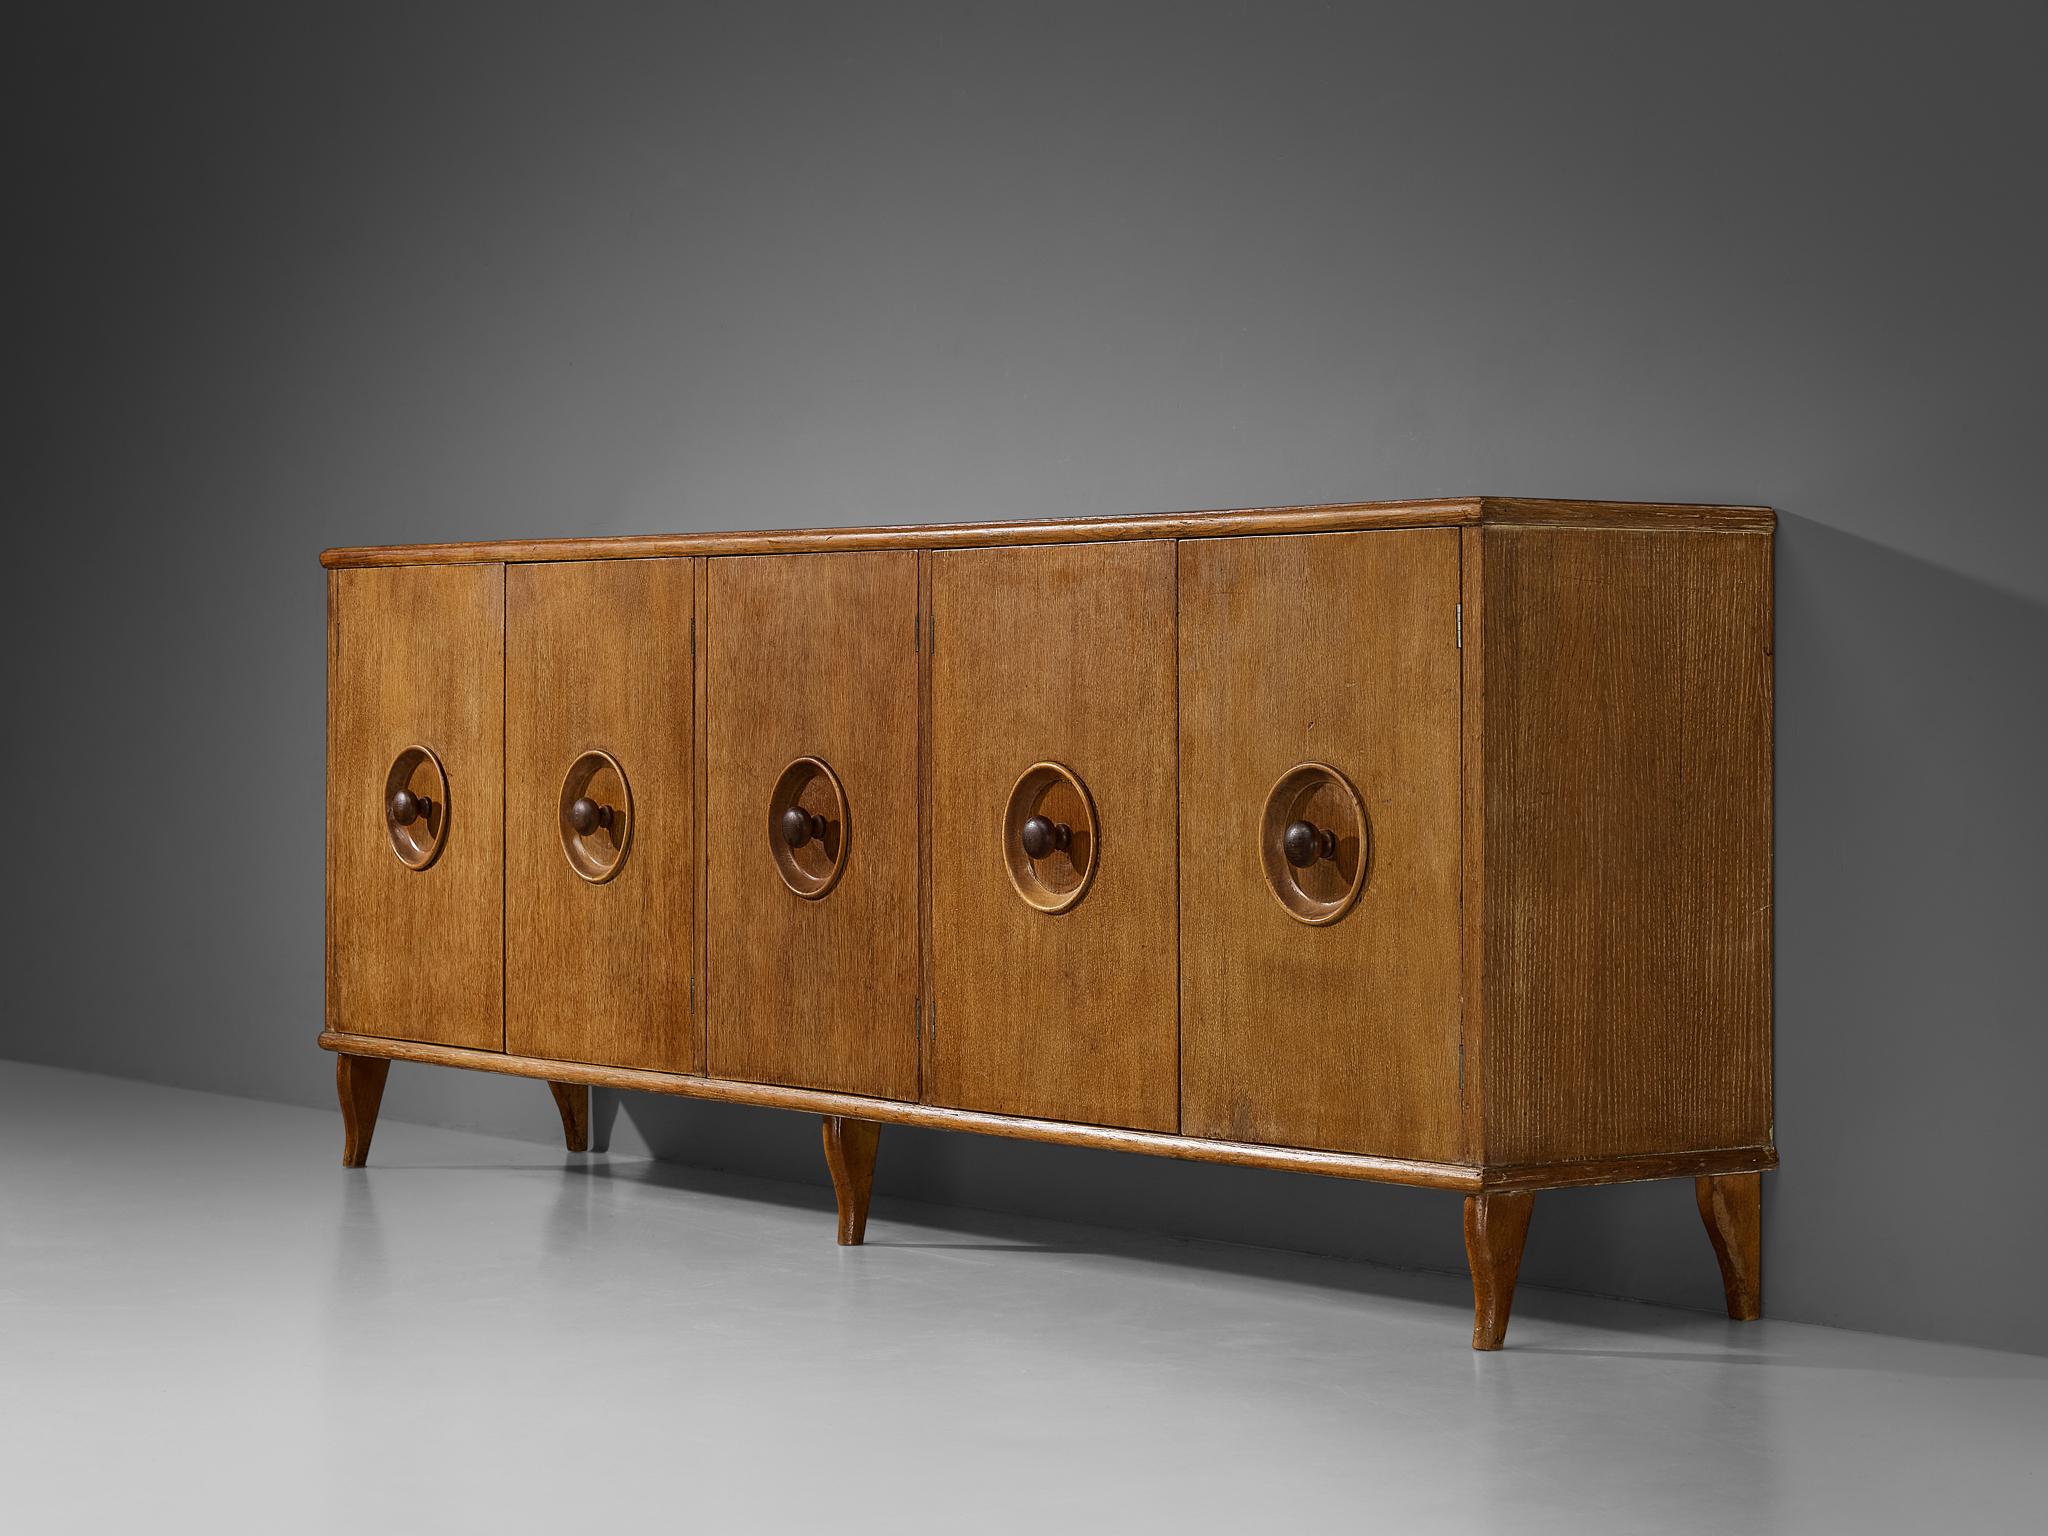 Sideboard, cerused chestnut, beech, mahogany, Italy, 1940s

A charming sideboard of Italian origin and dating back to the 1940s, encapsulates the Art Deco flair of that period. The corpus features five doors, each decorated with a round recessed